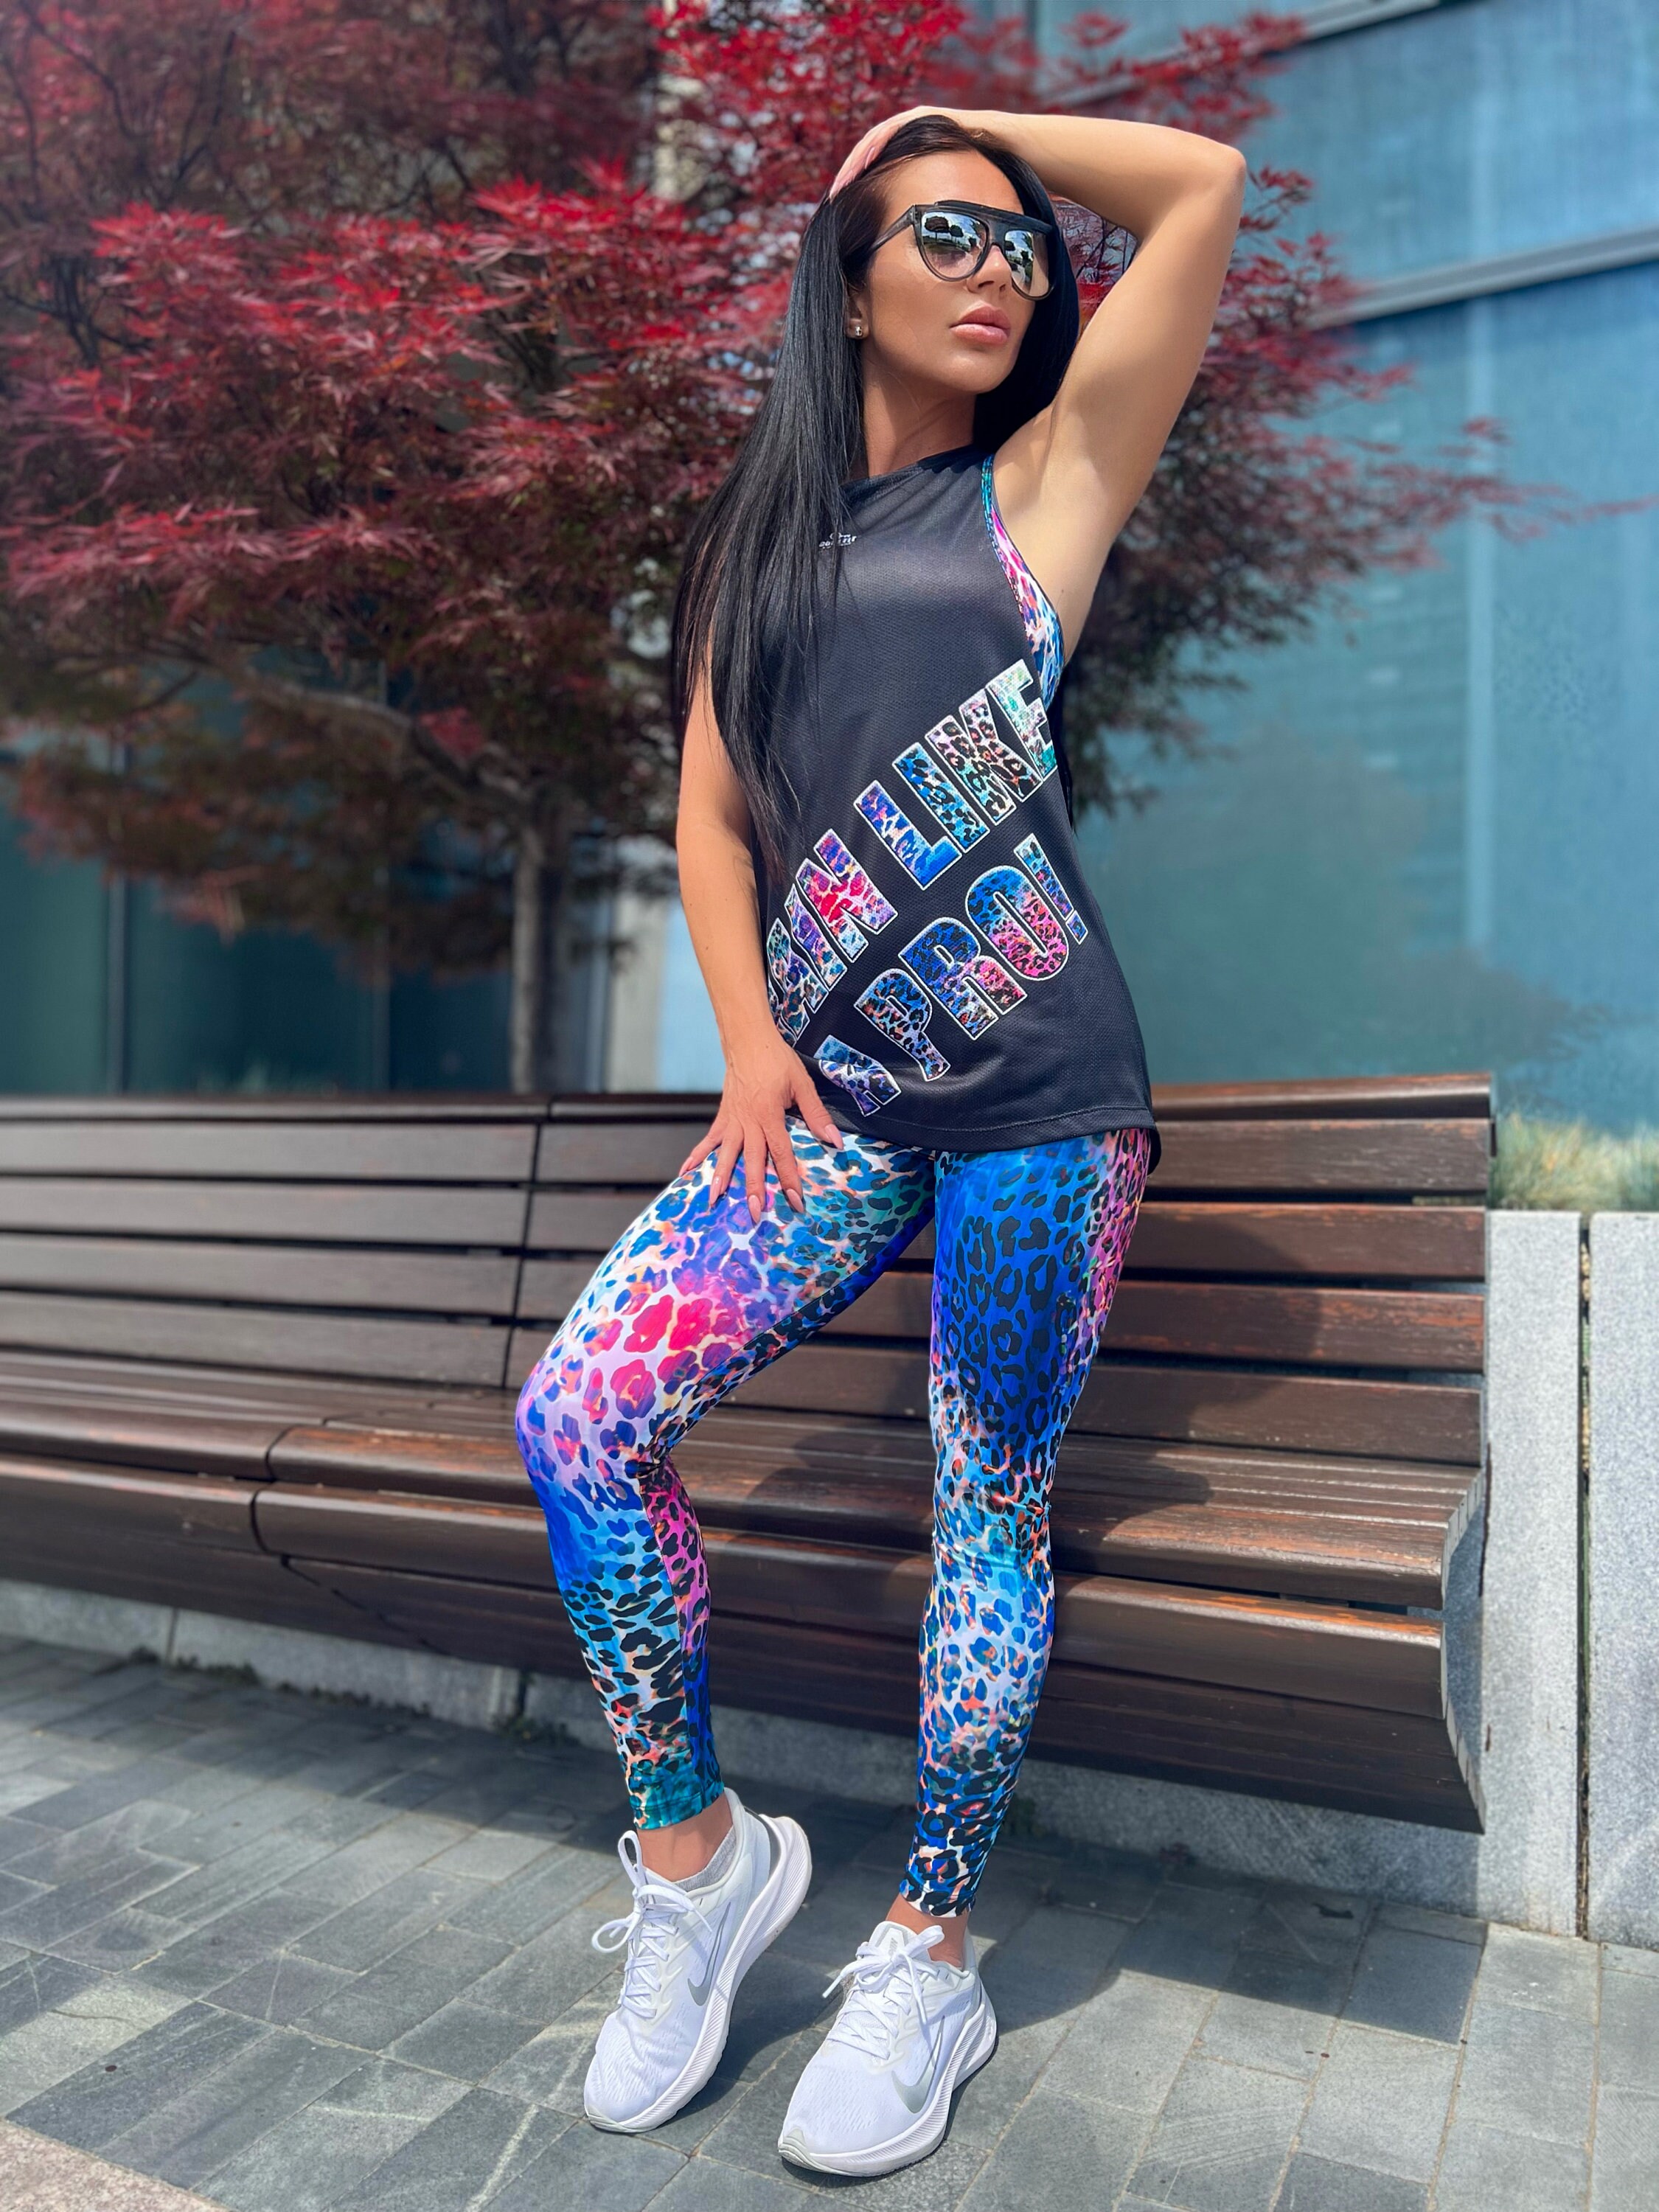 Only Play Leo Sports Legging - ShopStyle Clothes and Shoes